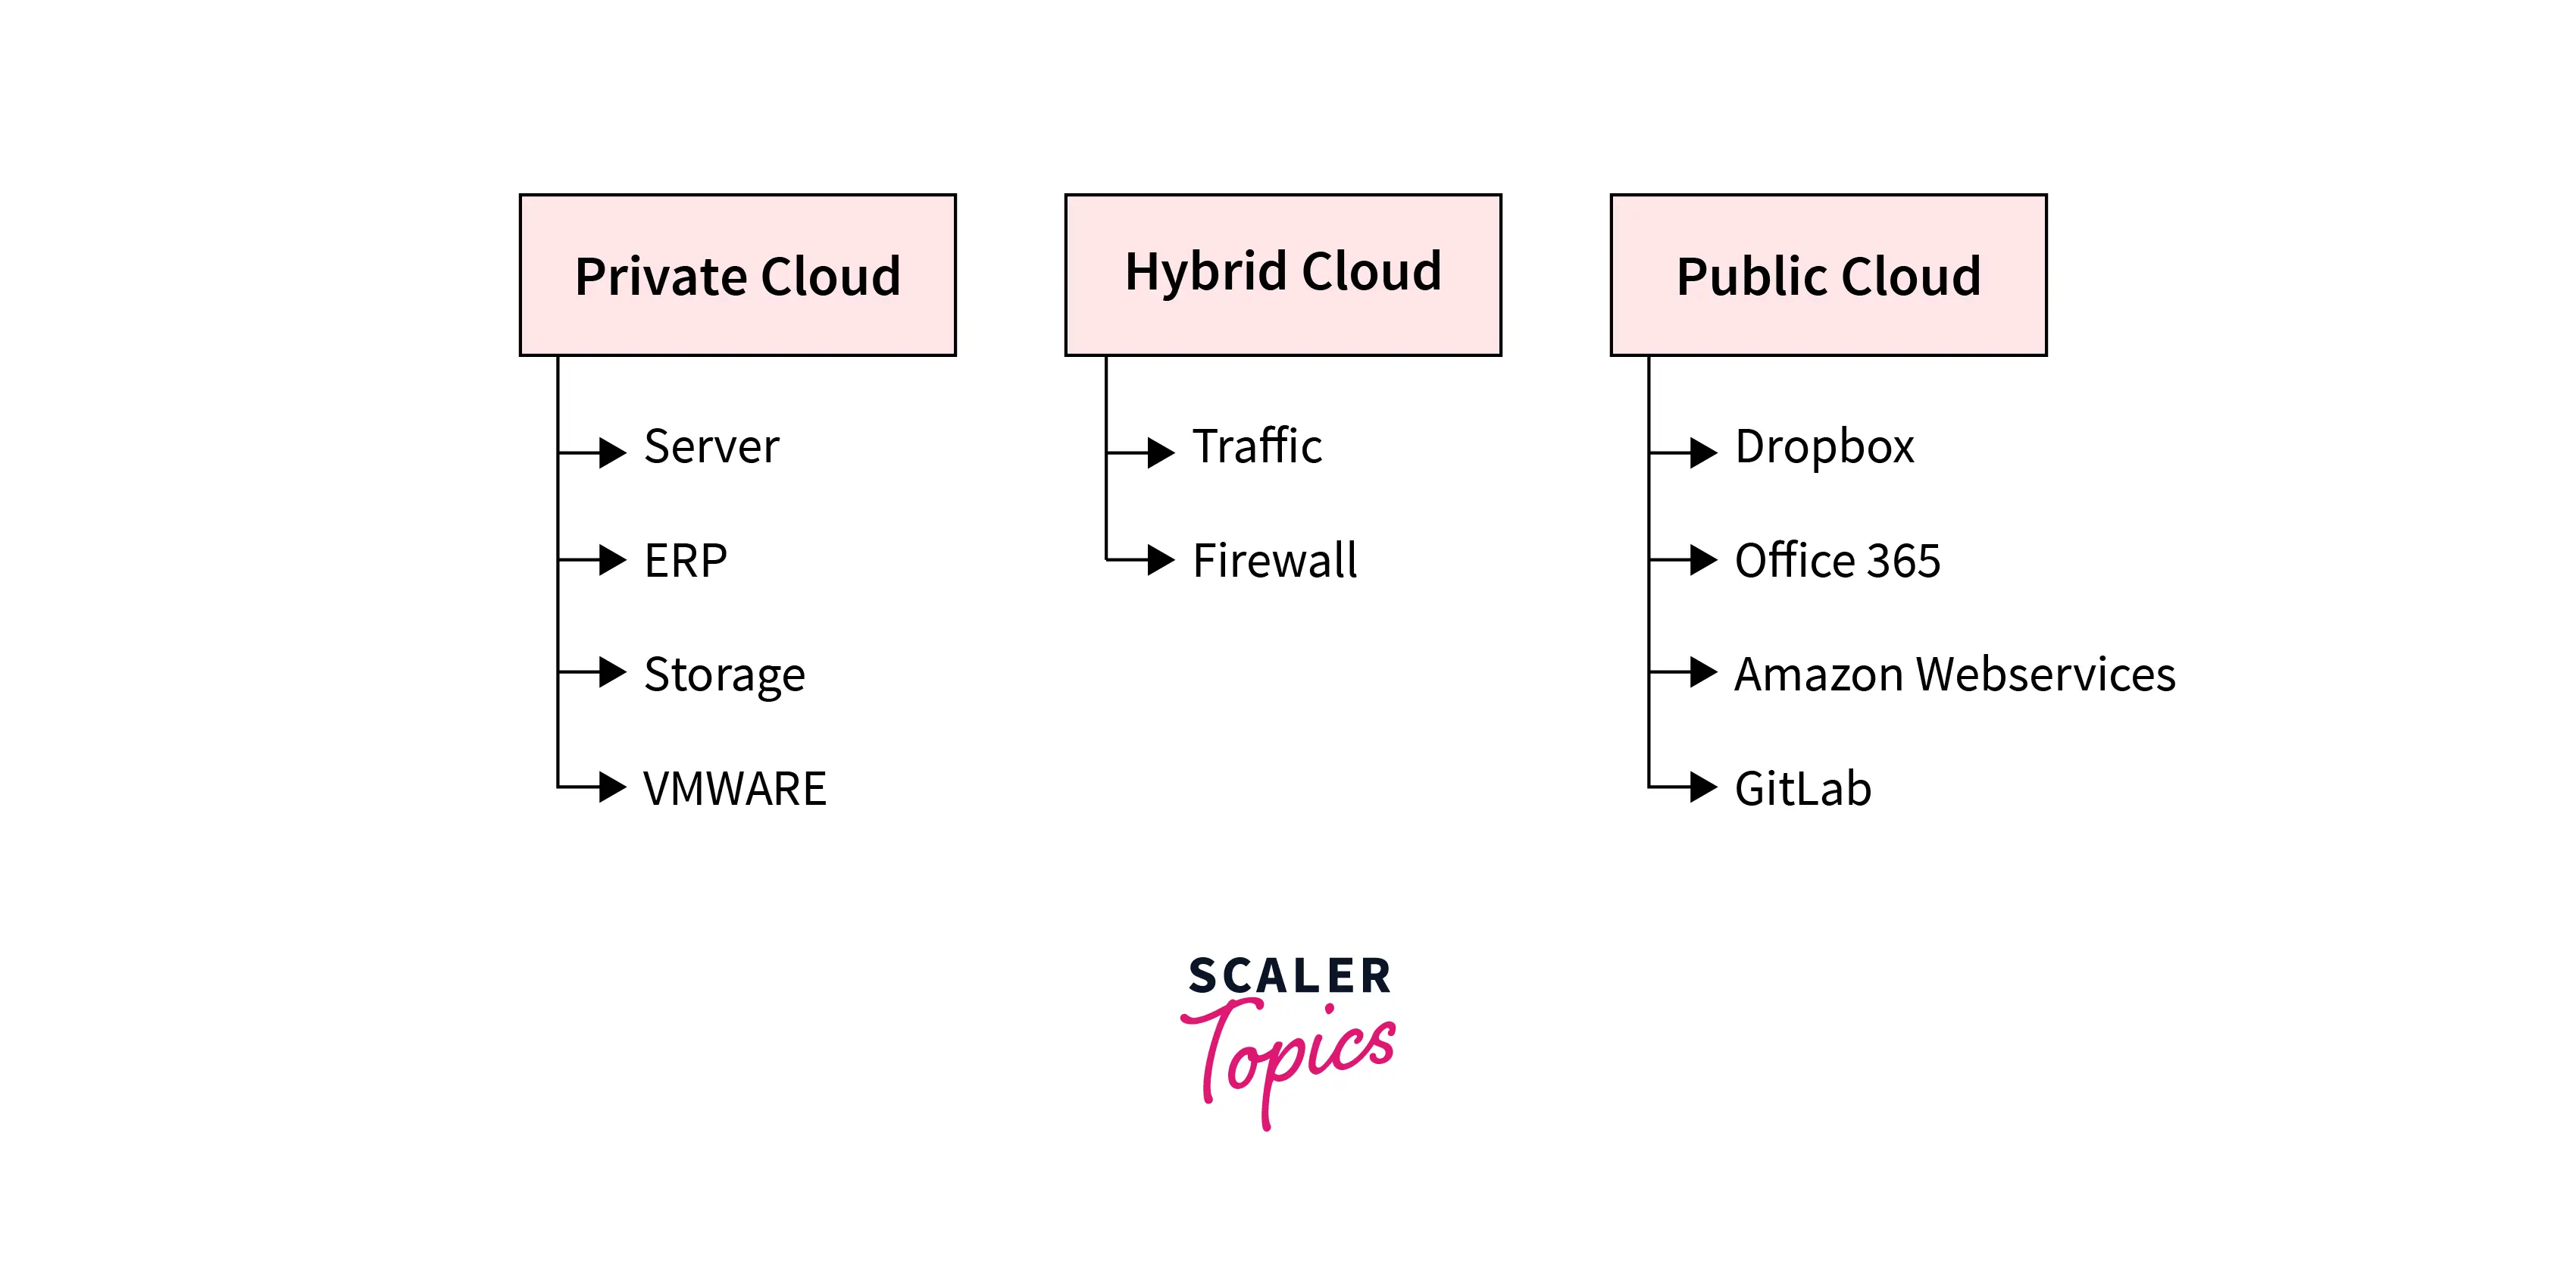 Hybrid Cloud Security Solutions